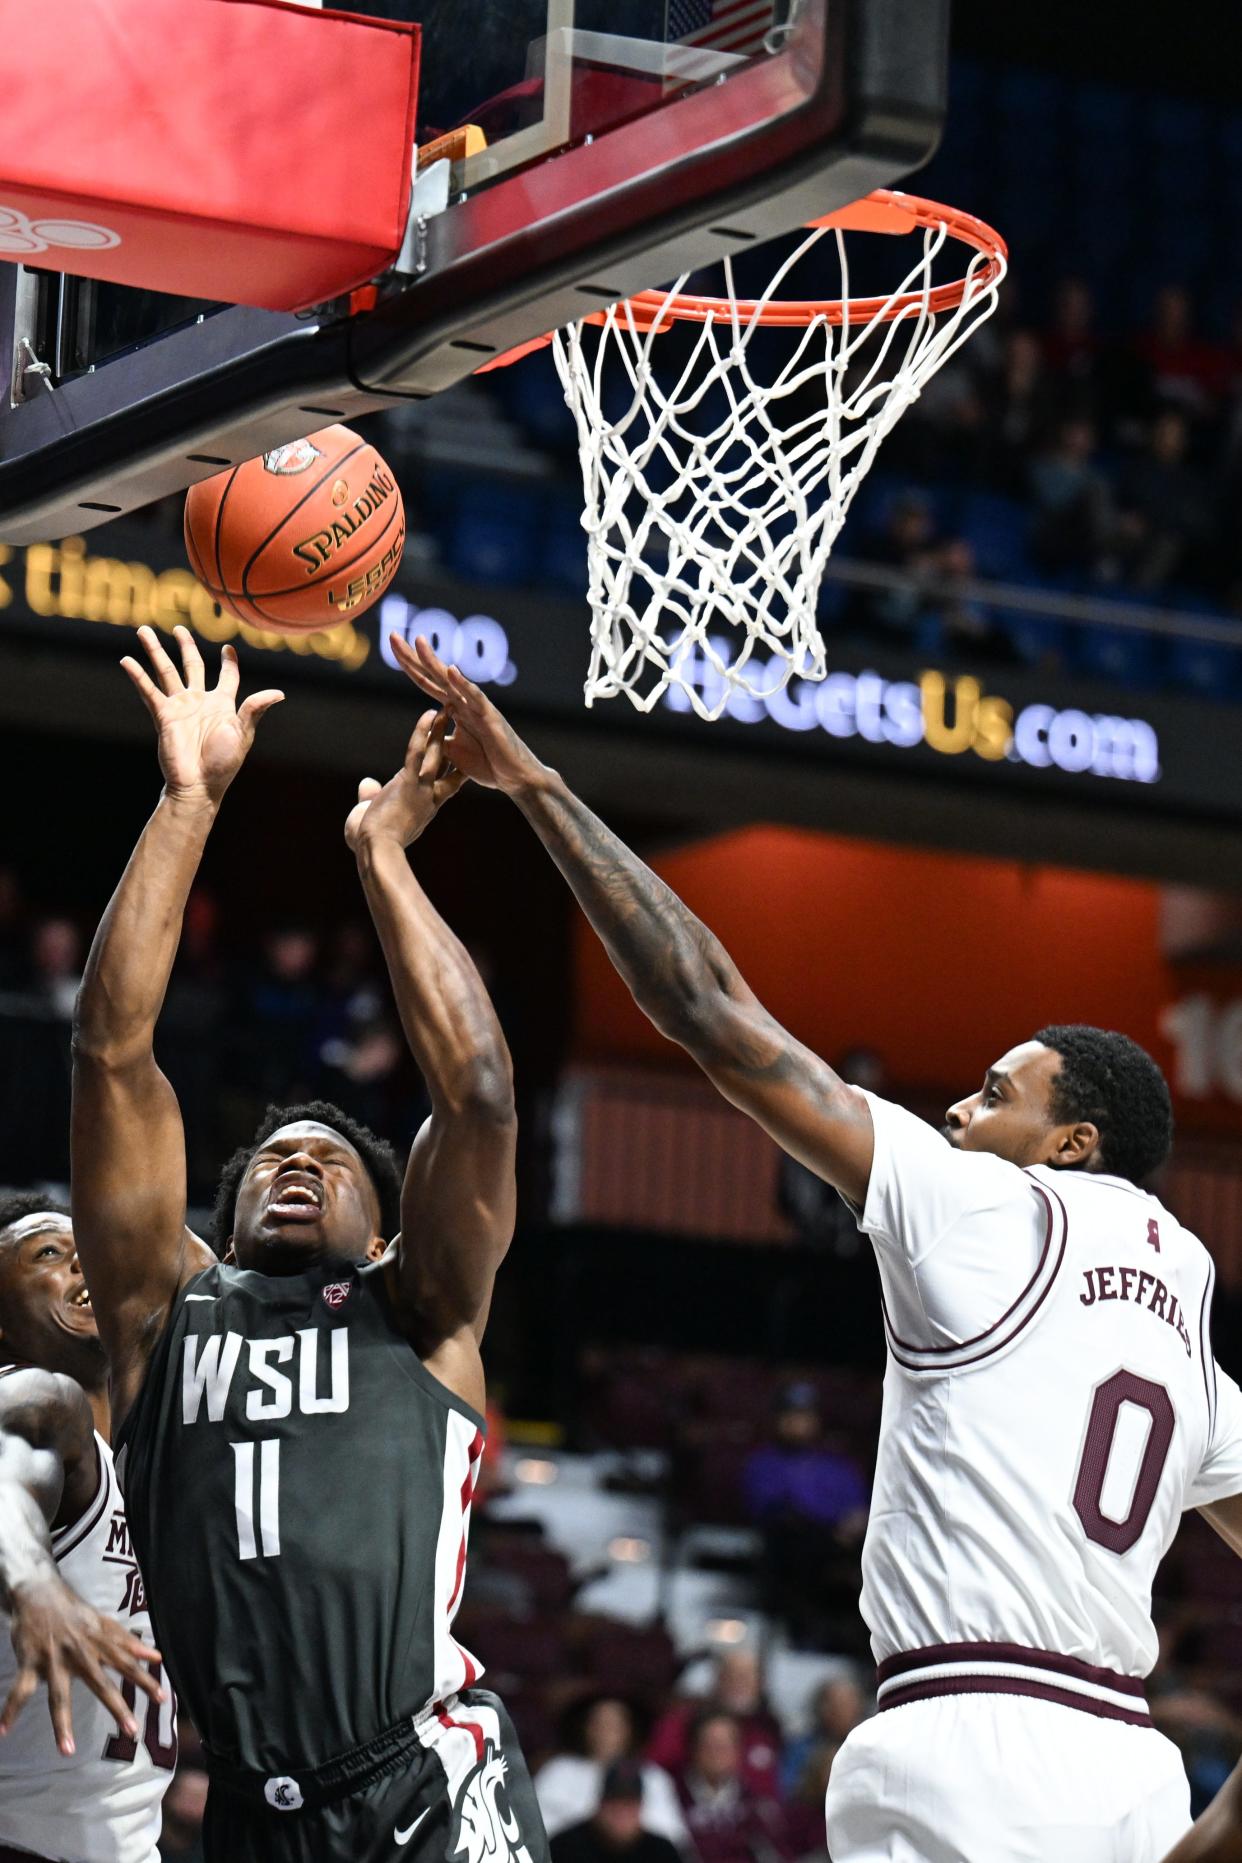 Nov 18, 2023; Uncasville, CT, USA; Washington State Cougars guard Joseph Yesufu (11) has his shot blocked by Mississippi State Bulldogs forward D.J. Jeffries (0) during the first half at Mohegan Sun Arena. Mandatory Credit: Mark Smith-USA TODAY Sports